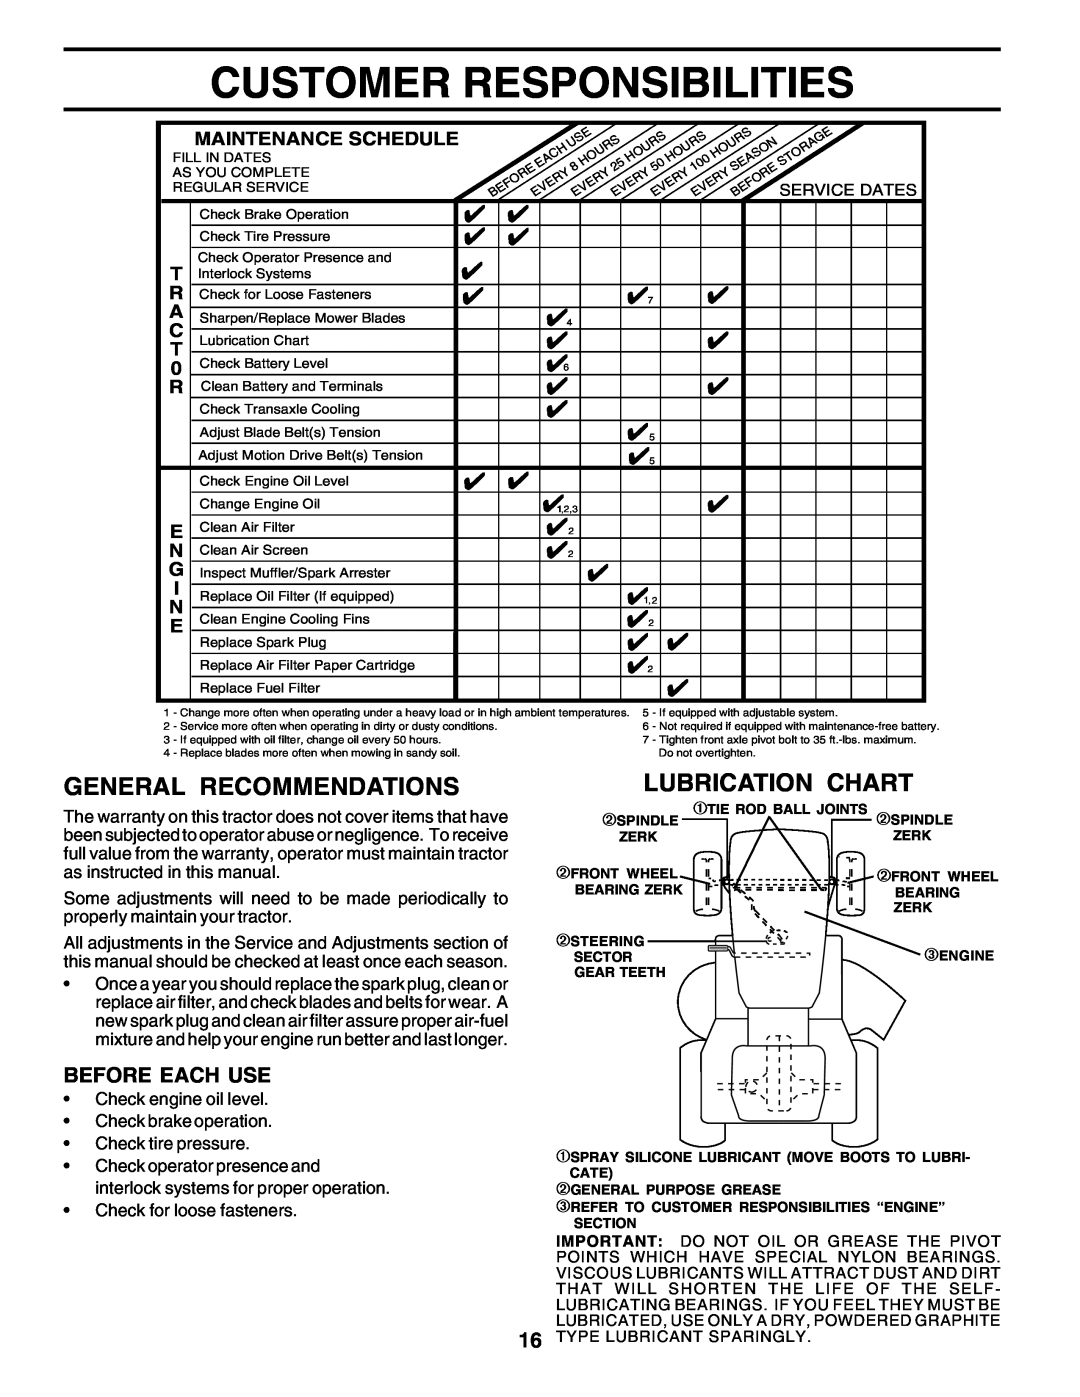 Poulan 178497 owner manual Customer Responsibilities, General Recommendations, Lubrication Chart ¡, Before Each Use 